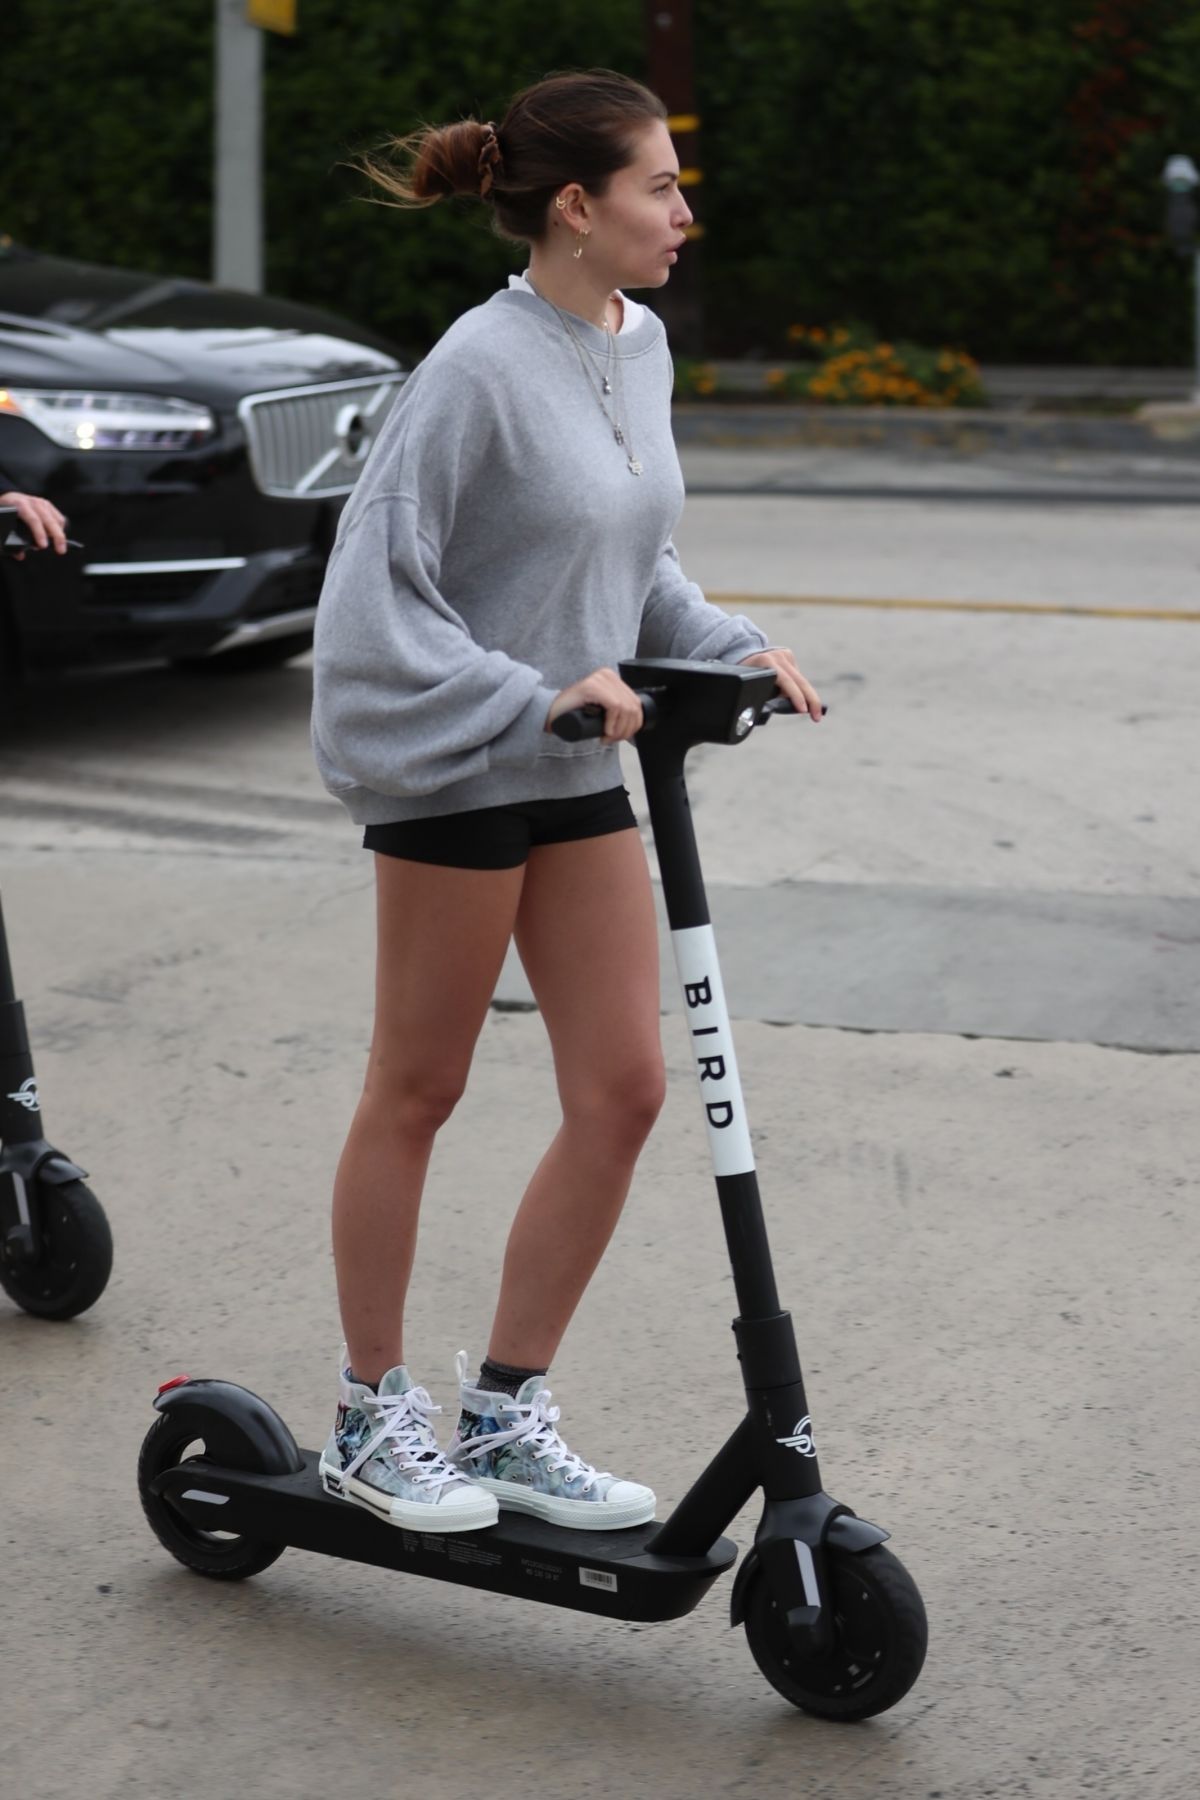 thylane-blondeau-riding-a-scooter-out-in-west-hollywood-06-21-2019-2.jpg